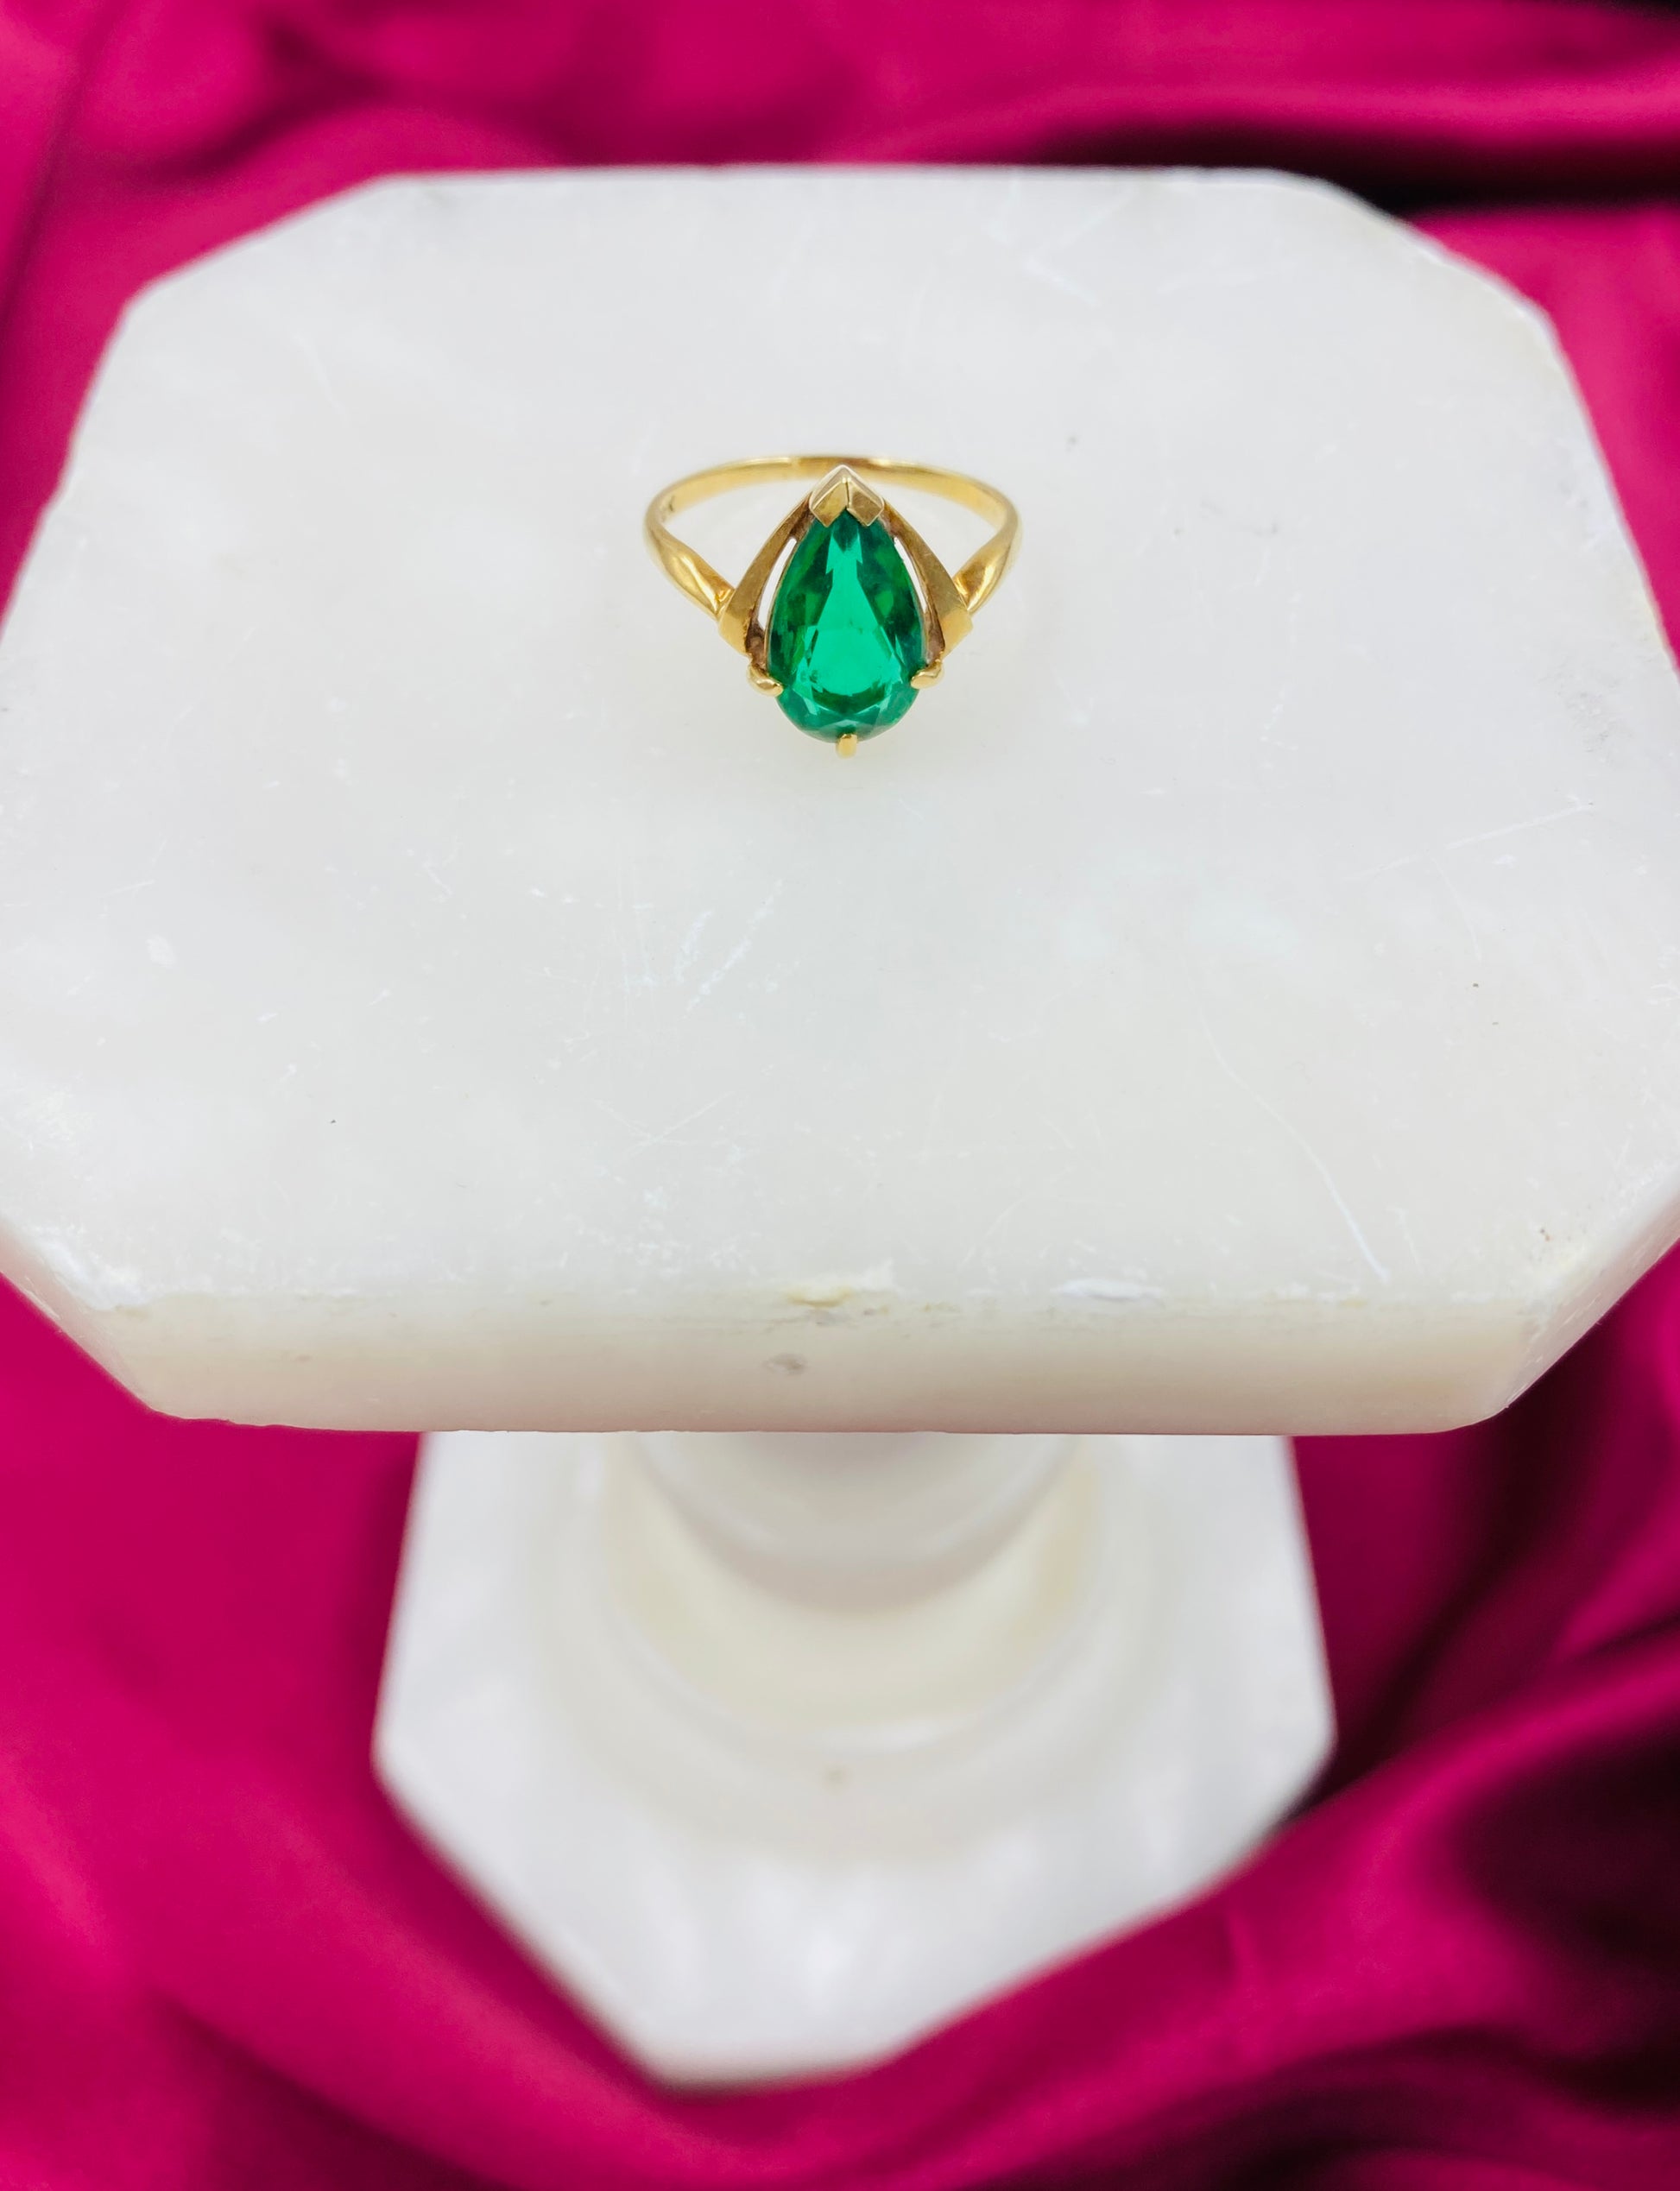 Vintage Green Emerald Pear Cut 10K Gold Ring, Size 6